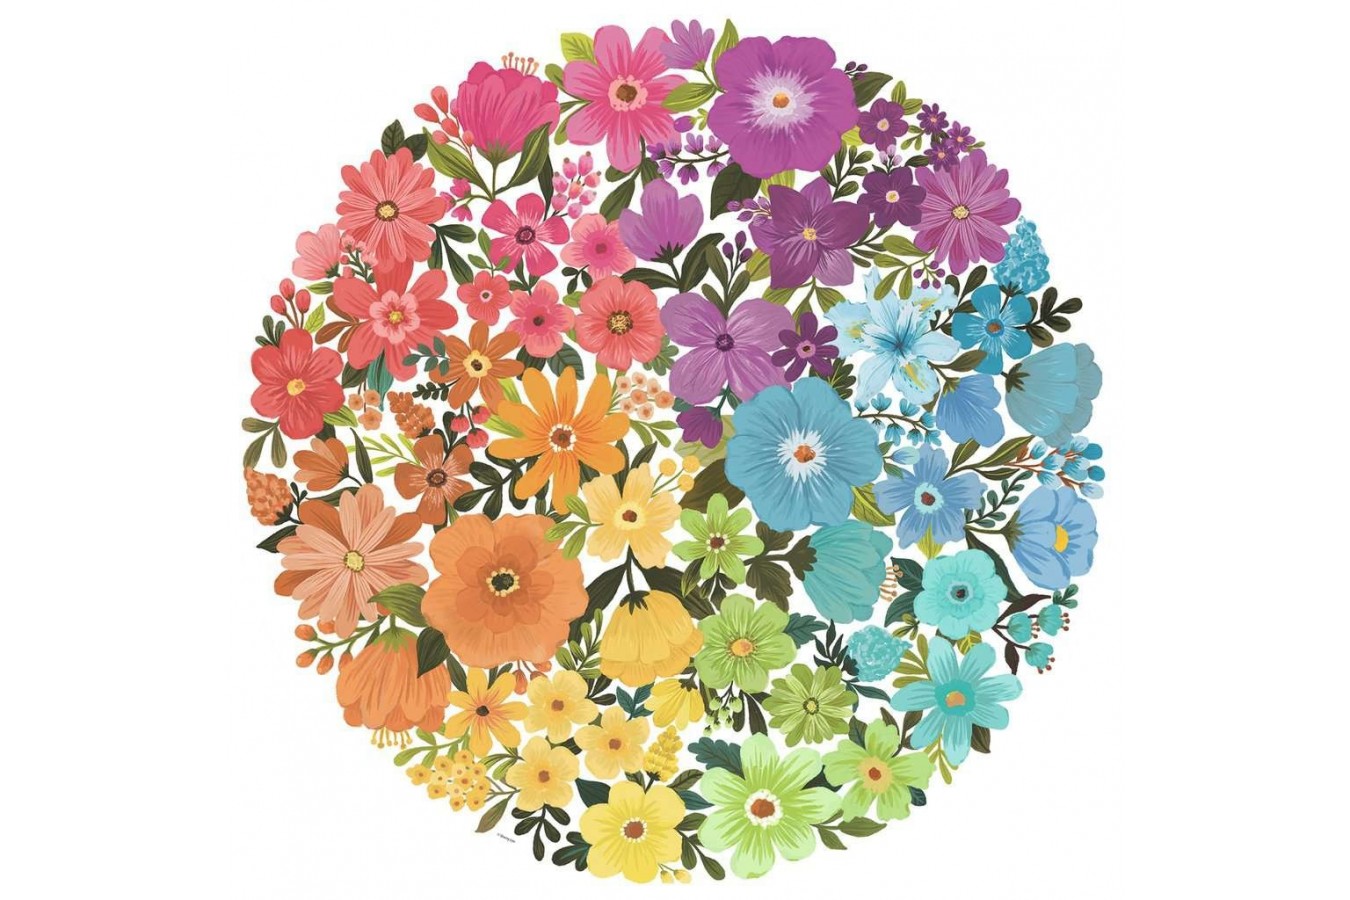 Puzzle 500 piese rotund Ravensburger - Circle of Colors - Flowers (Ravensburger-17167)